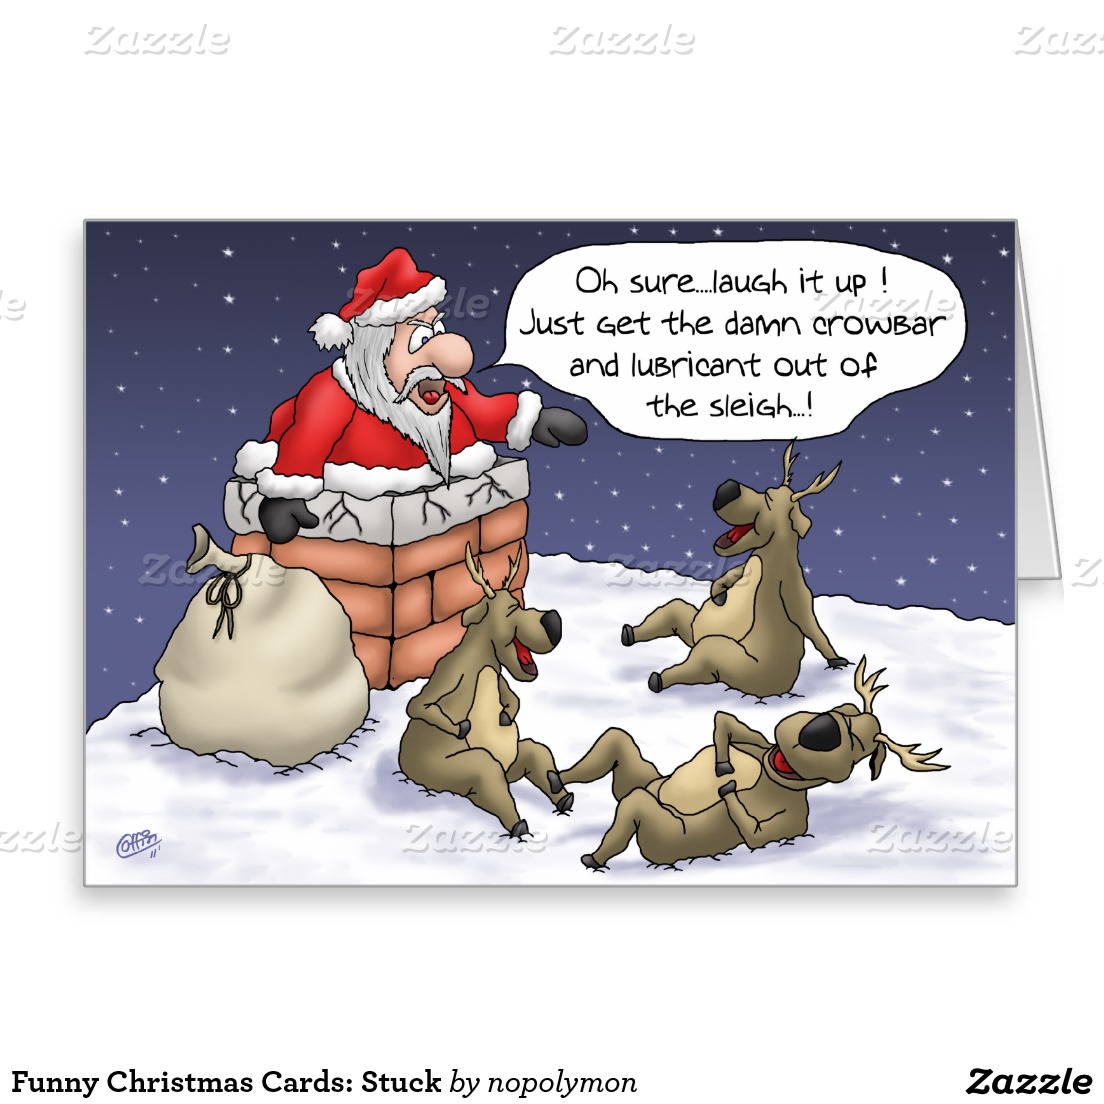 Funny Christmas Pictures 2 6 Cool Hd Wallpaper - Funny Merry Christmas Cartoons - HD Wallpaper 